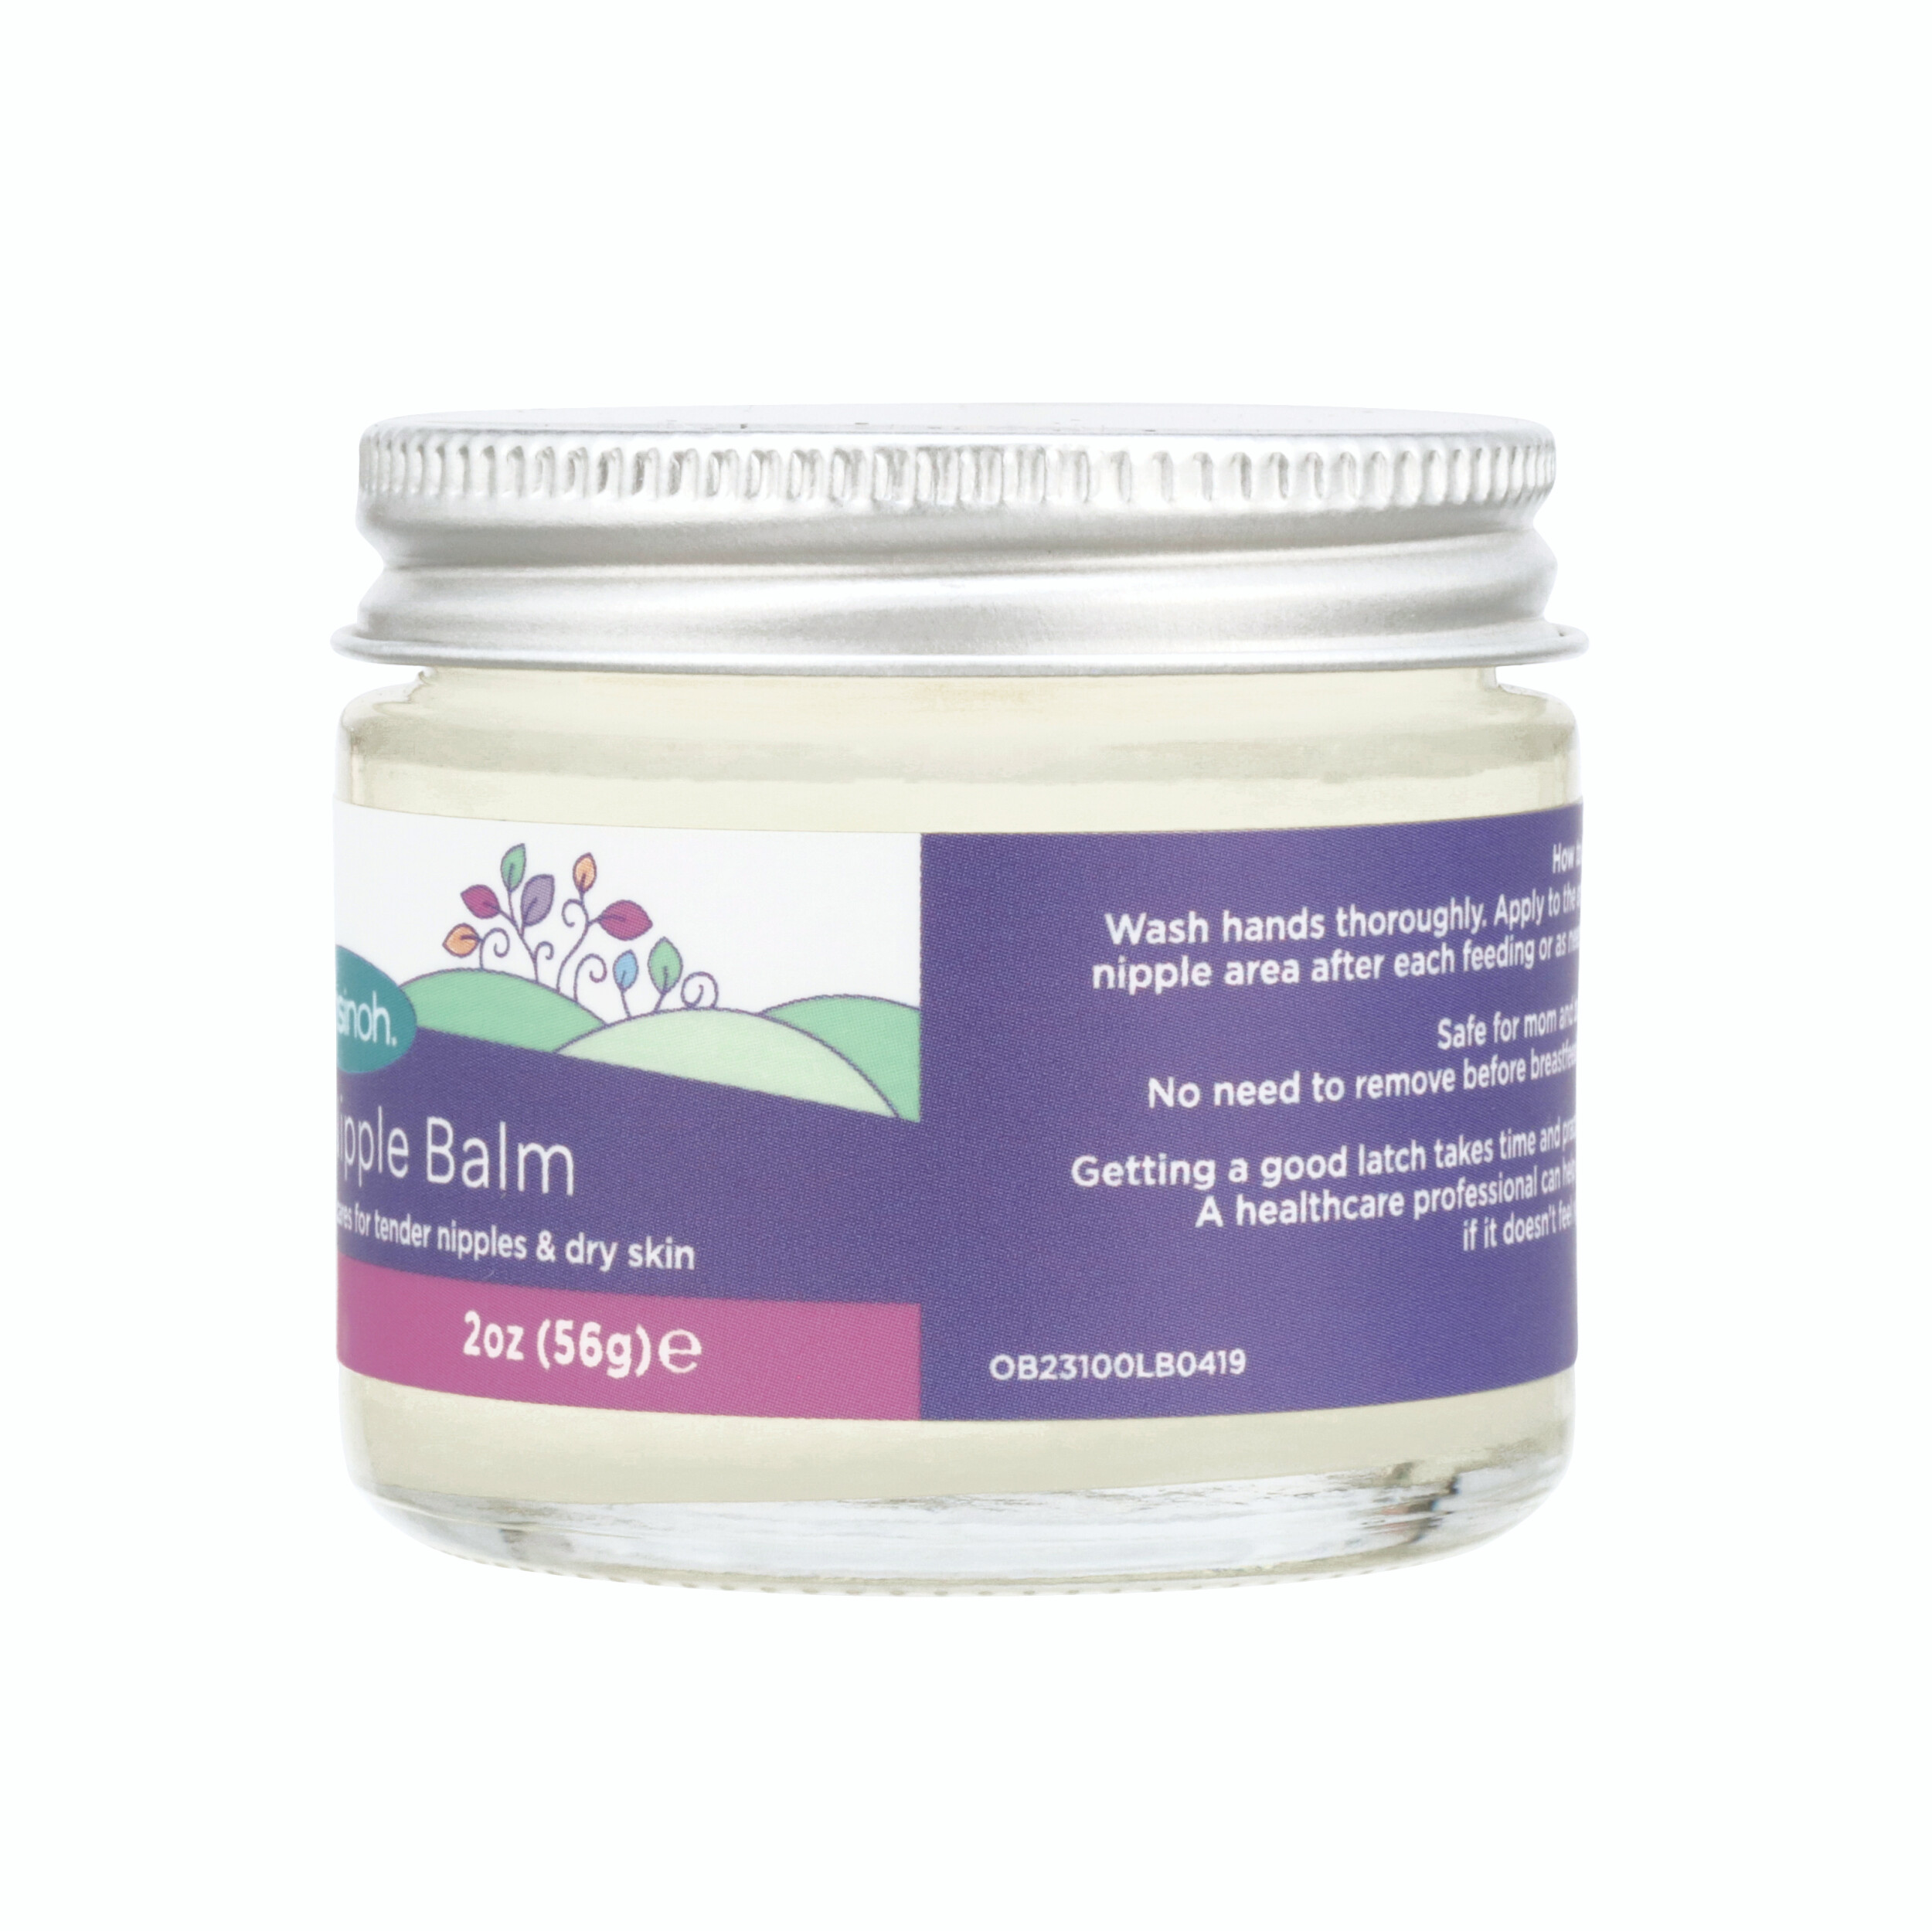 Tubby Todd Nipple Balm | 1.9 oz | Use This Gentle, Lanolin-free Balm to Help Prevent and Restore Cracked, Dry Nipples While You’re Nursing Your Little